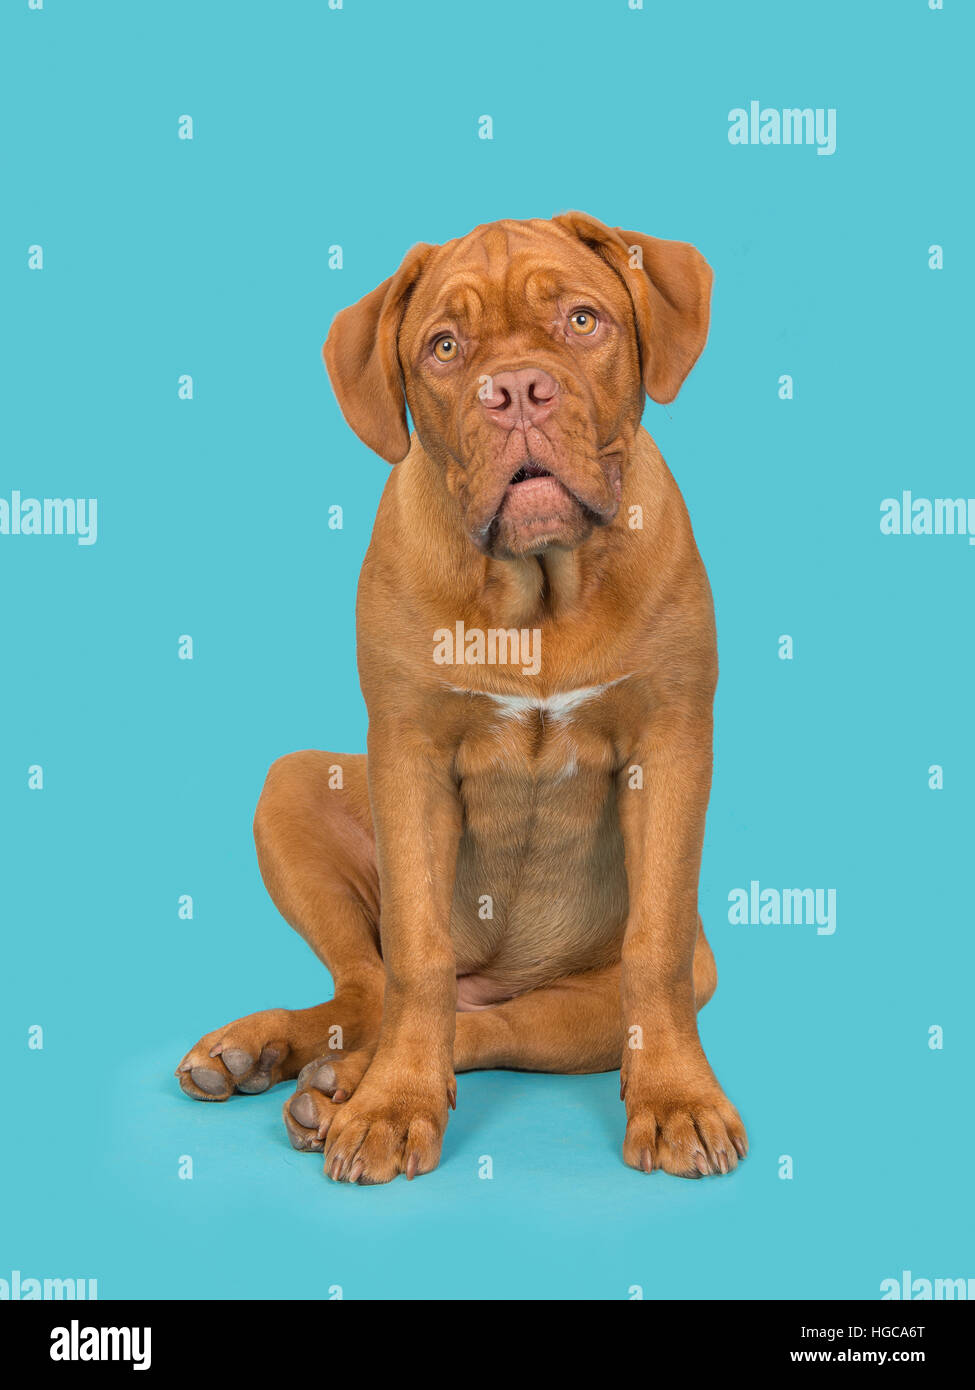 Cute sitting bordeaux dogue facing the camera on a blue background Stock Photo